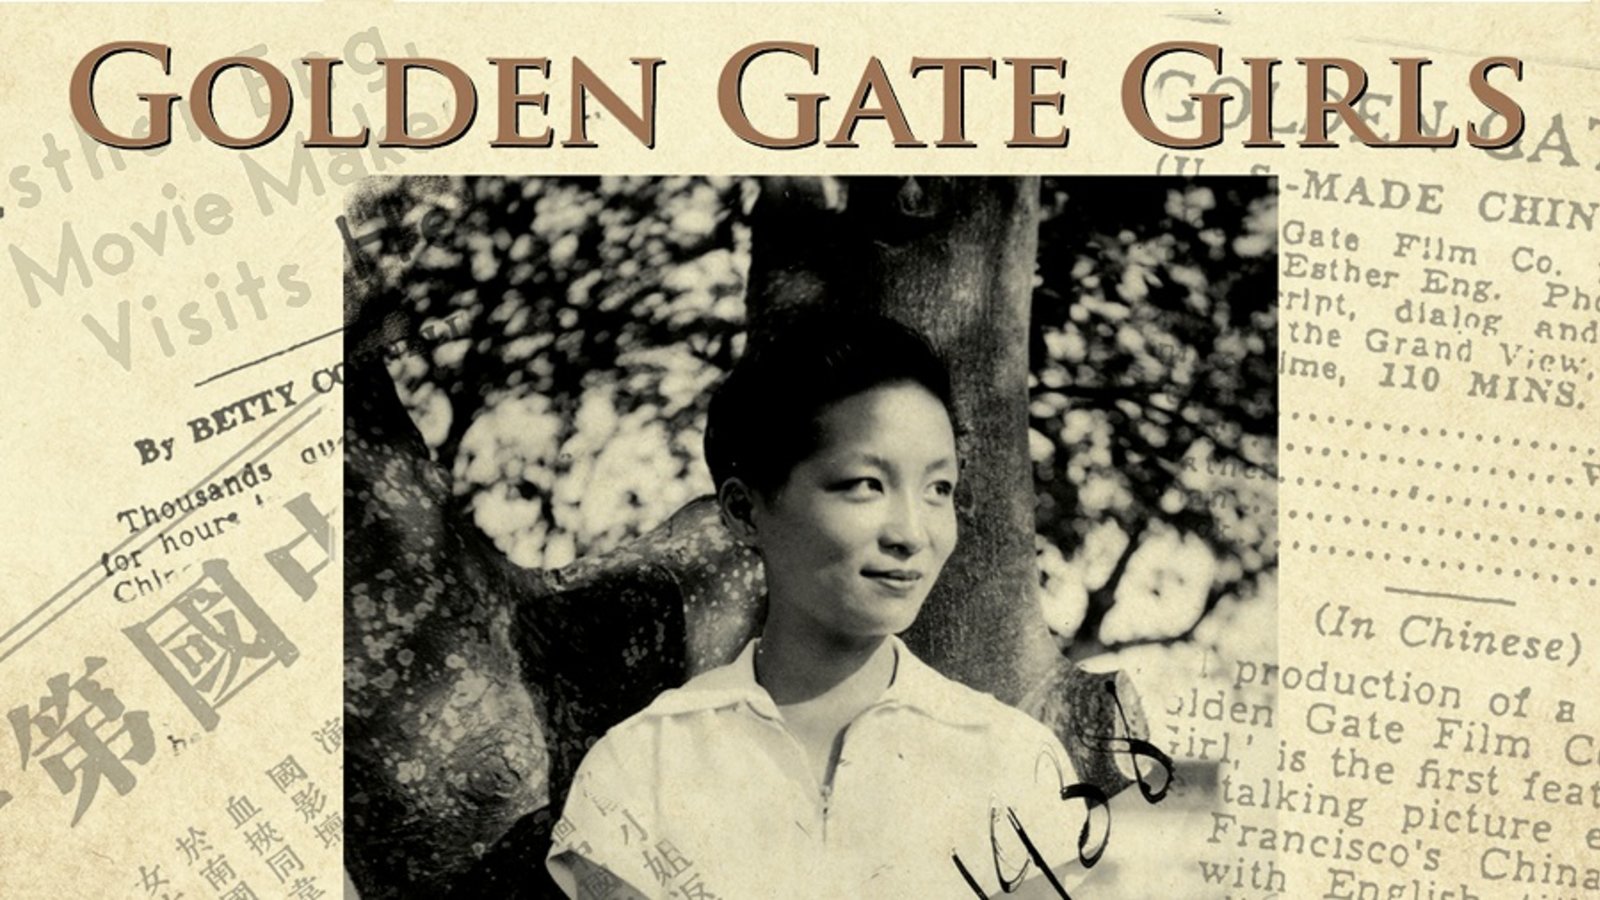 Golden Gate Girls Promo Image. Newspaper Clippings with photo of Esther Eng in the middle.